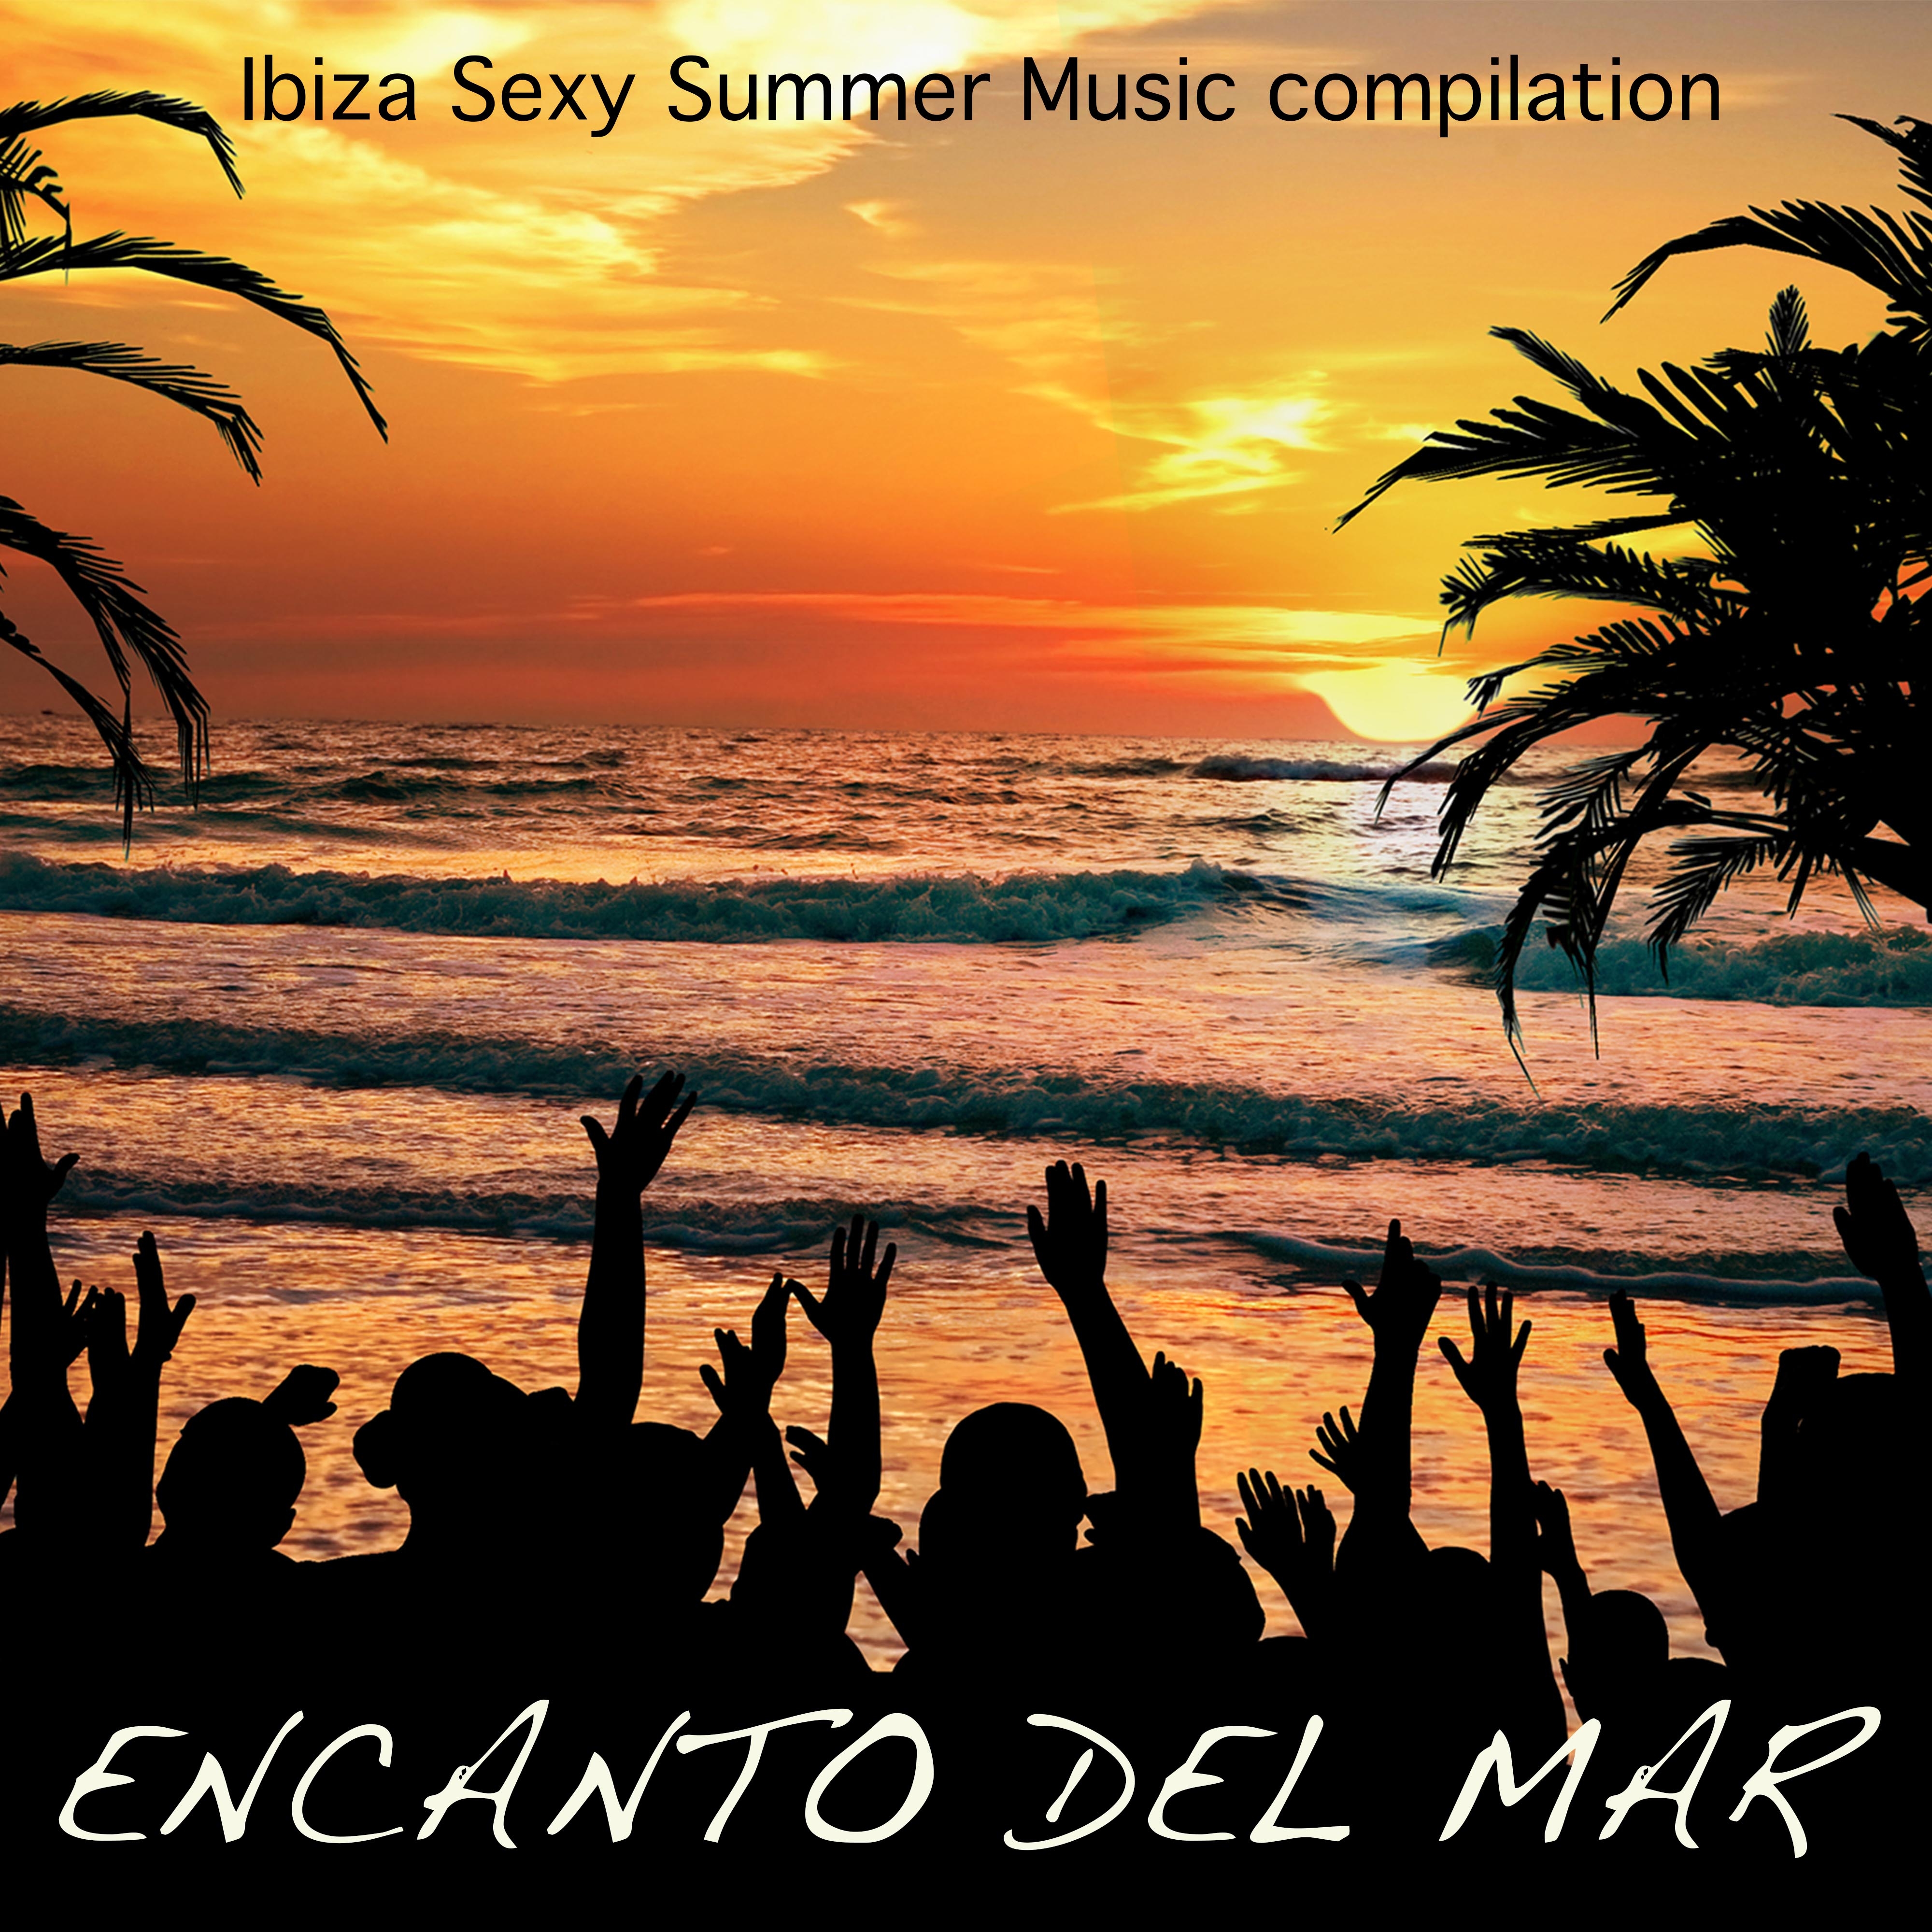 Encanto del Mar - Ibiza **** Summer Music Compilation: Wonderful Lounge Ambient Music Bar, **** Chillout Music Cafe & Liquid Dubstep Erotic Sounds